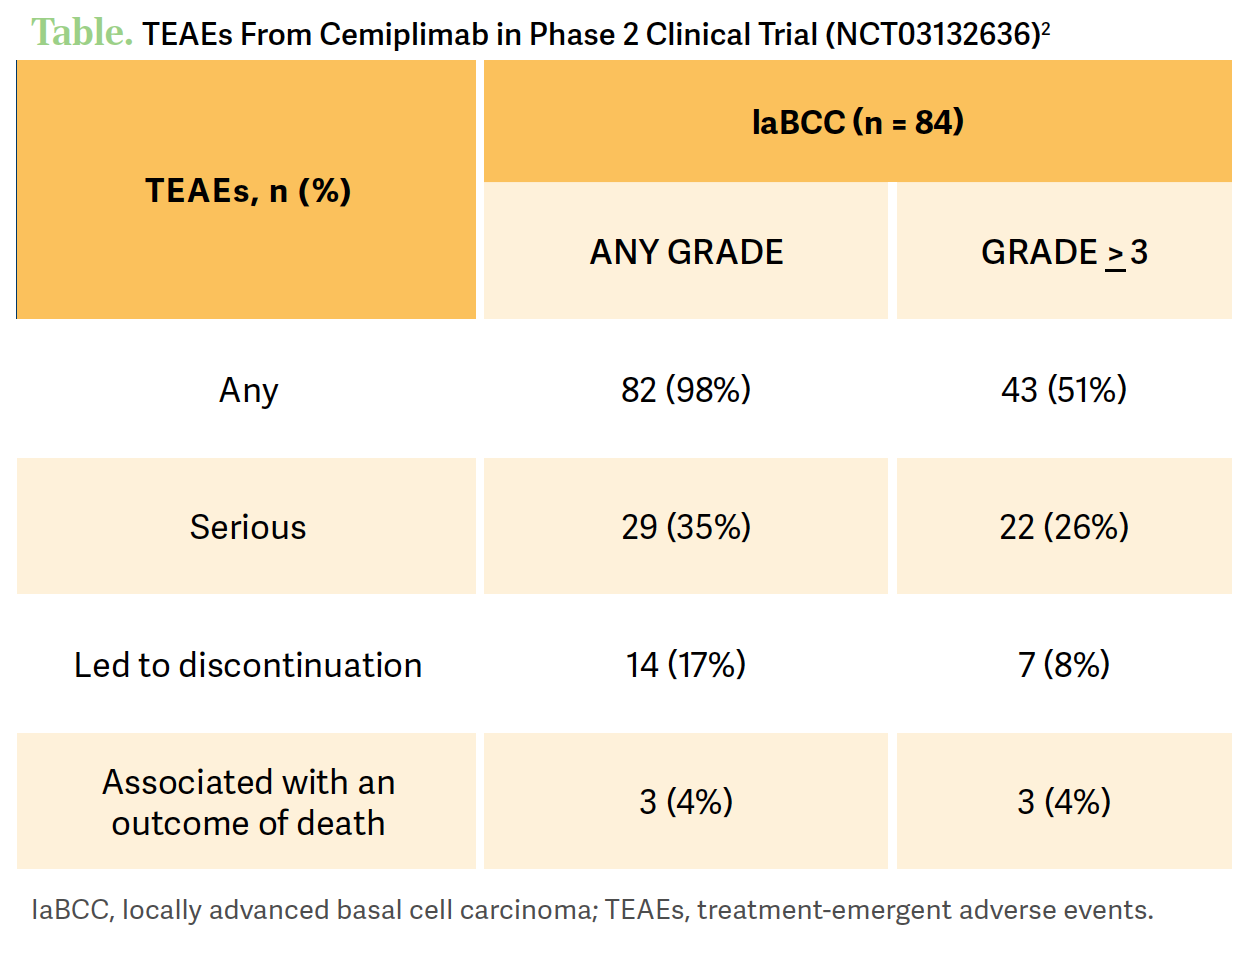 table: cemiplimab trial